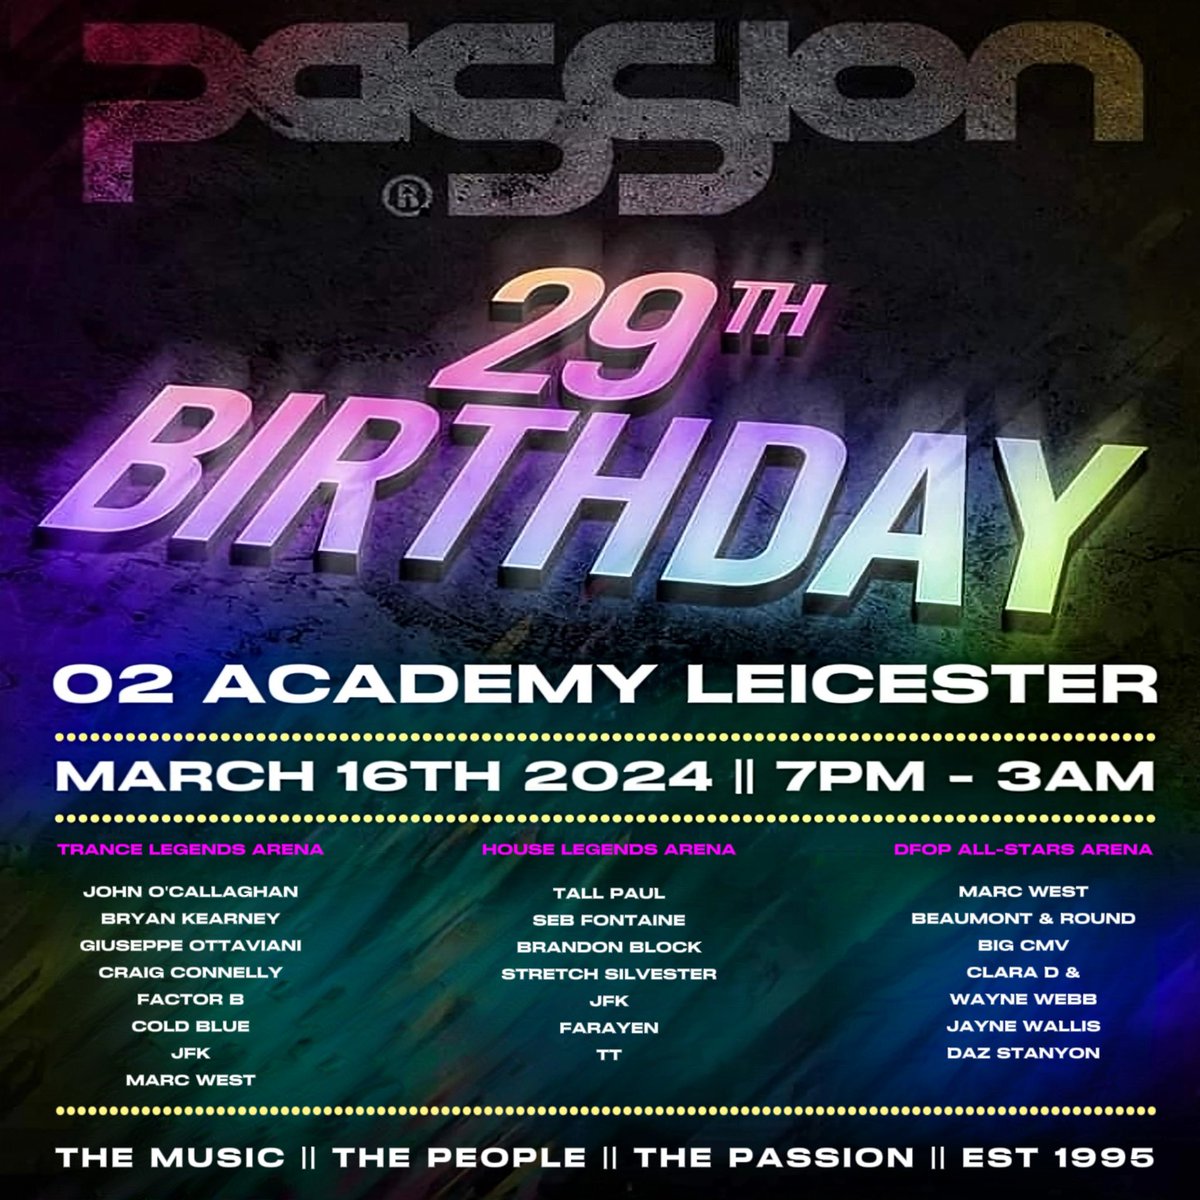 Looking forward to helping Passion celebrate their 29th Birthday, going to massive, grab your tickets here: bit.ly/PaSSion29 #passion29 #live #passion #dj